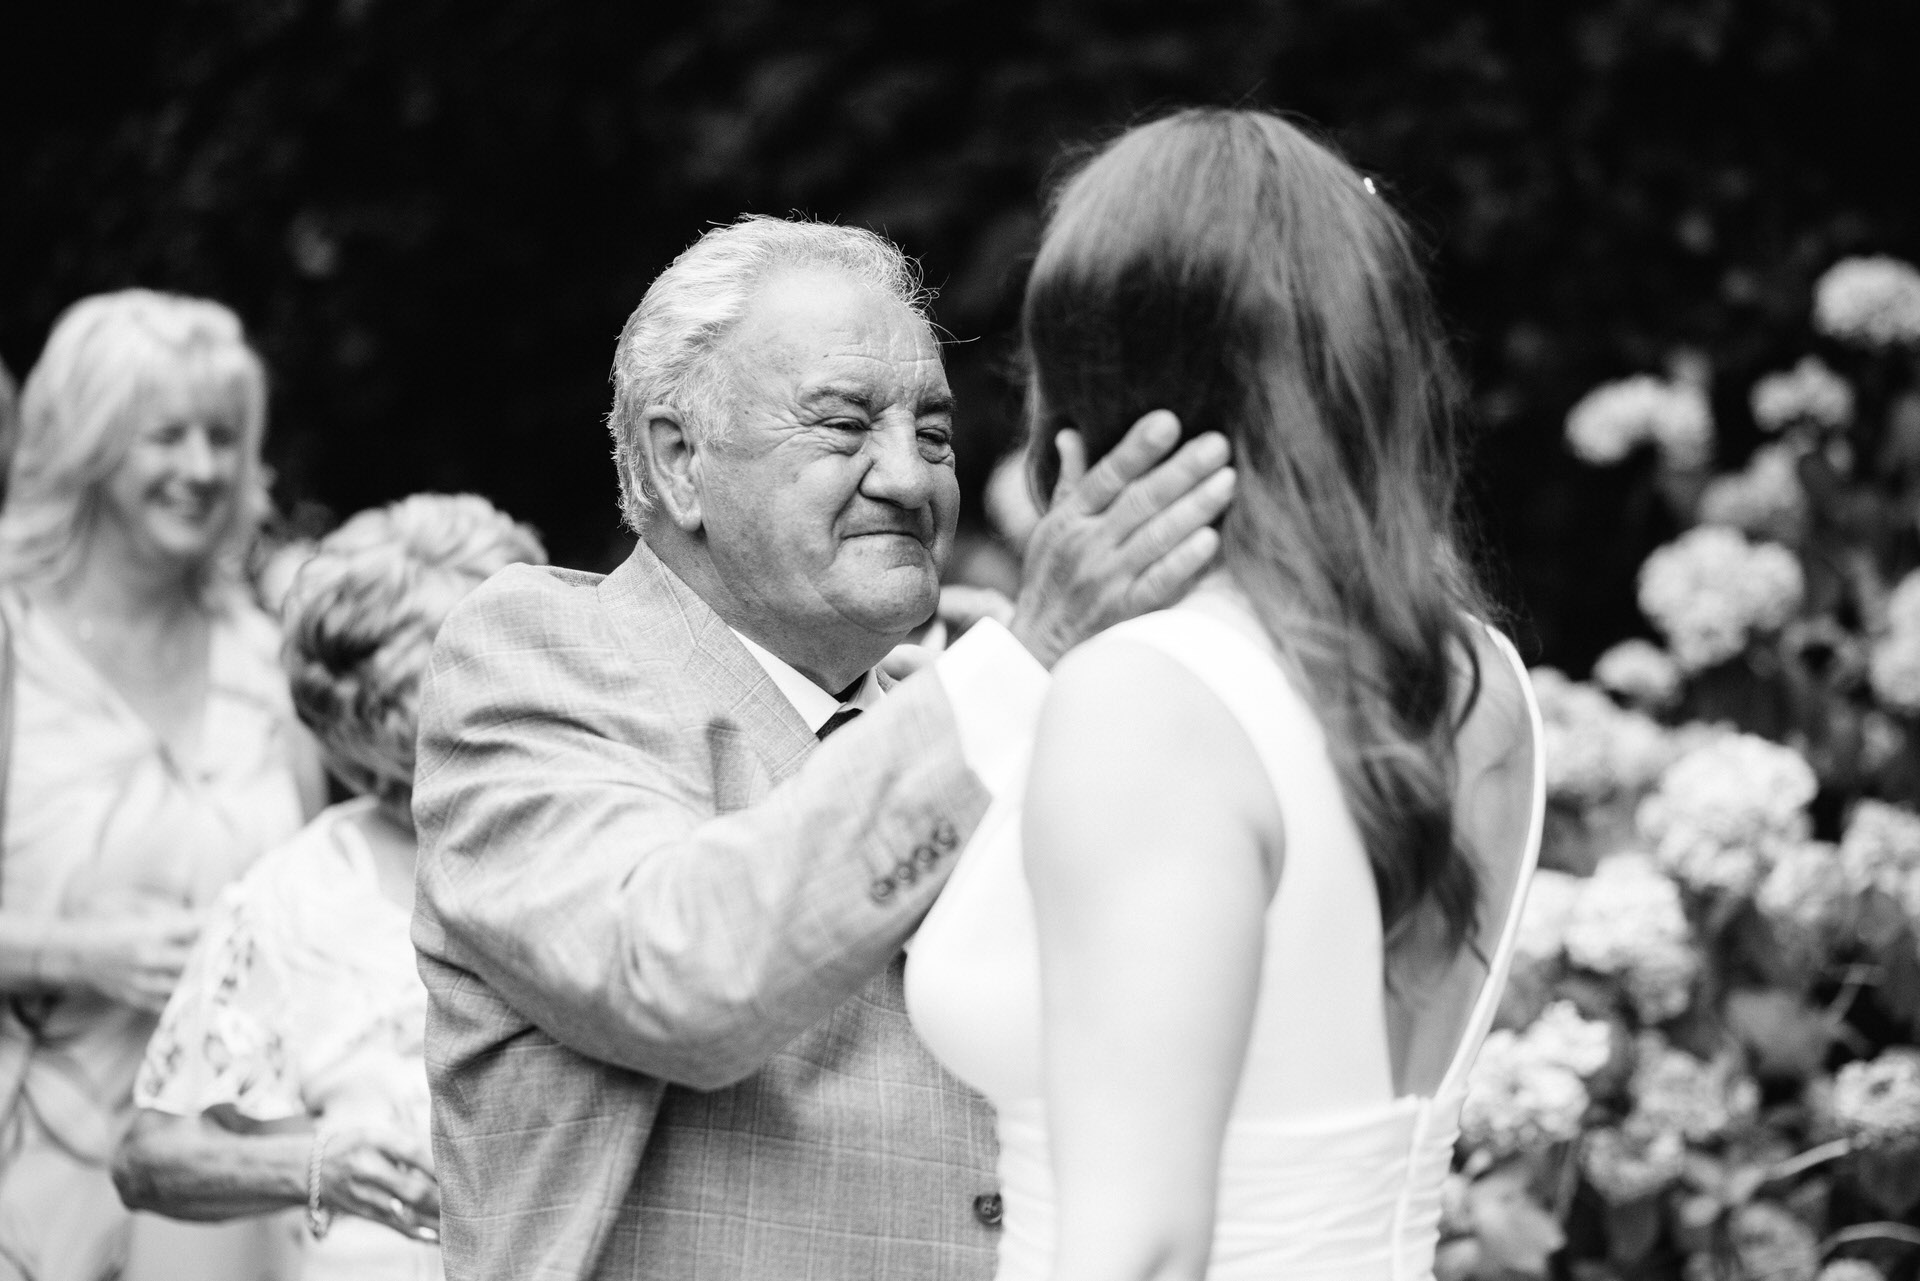 grandad and granddaughter on wedding day